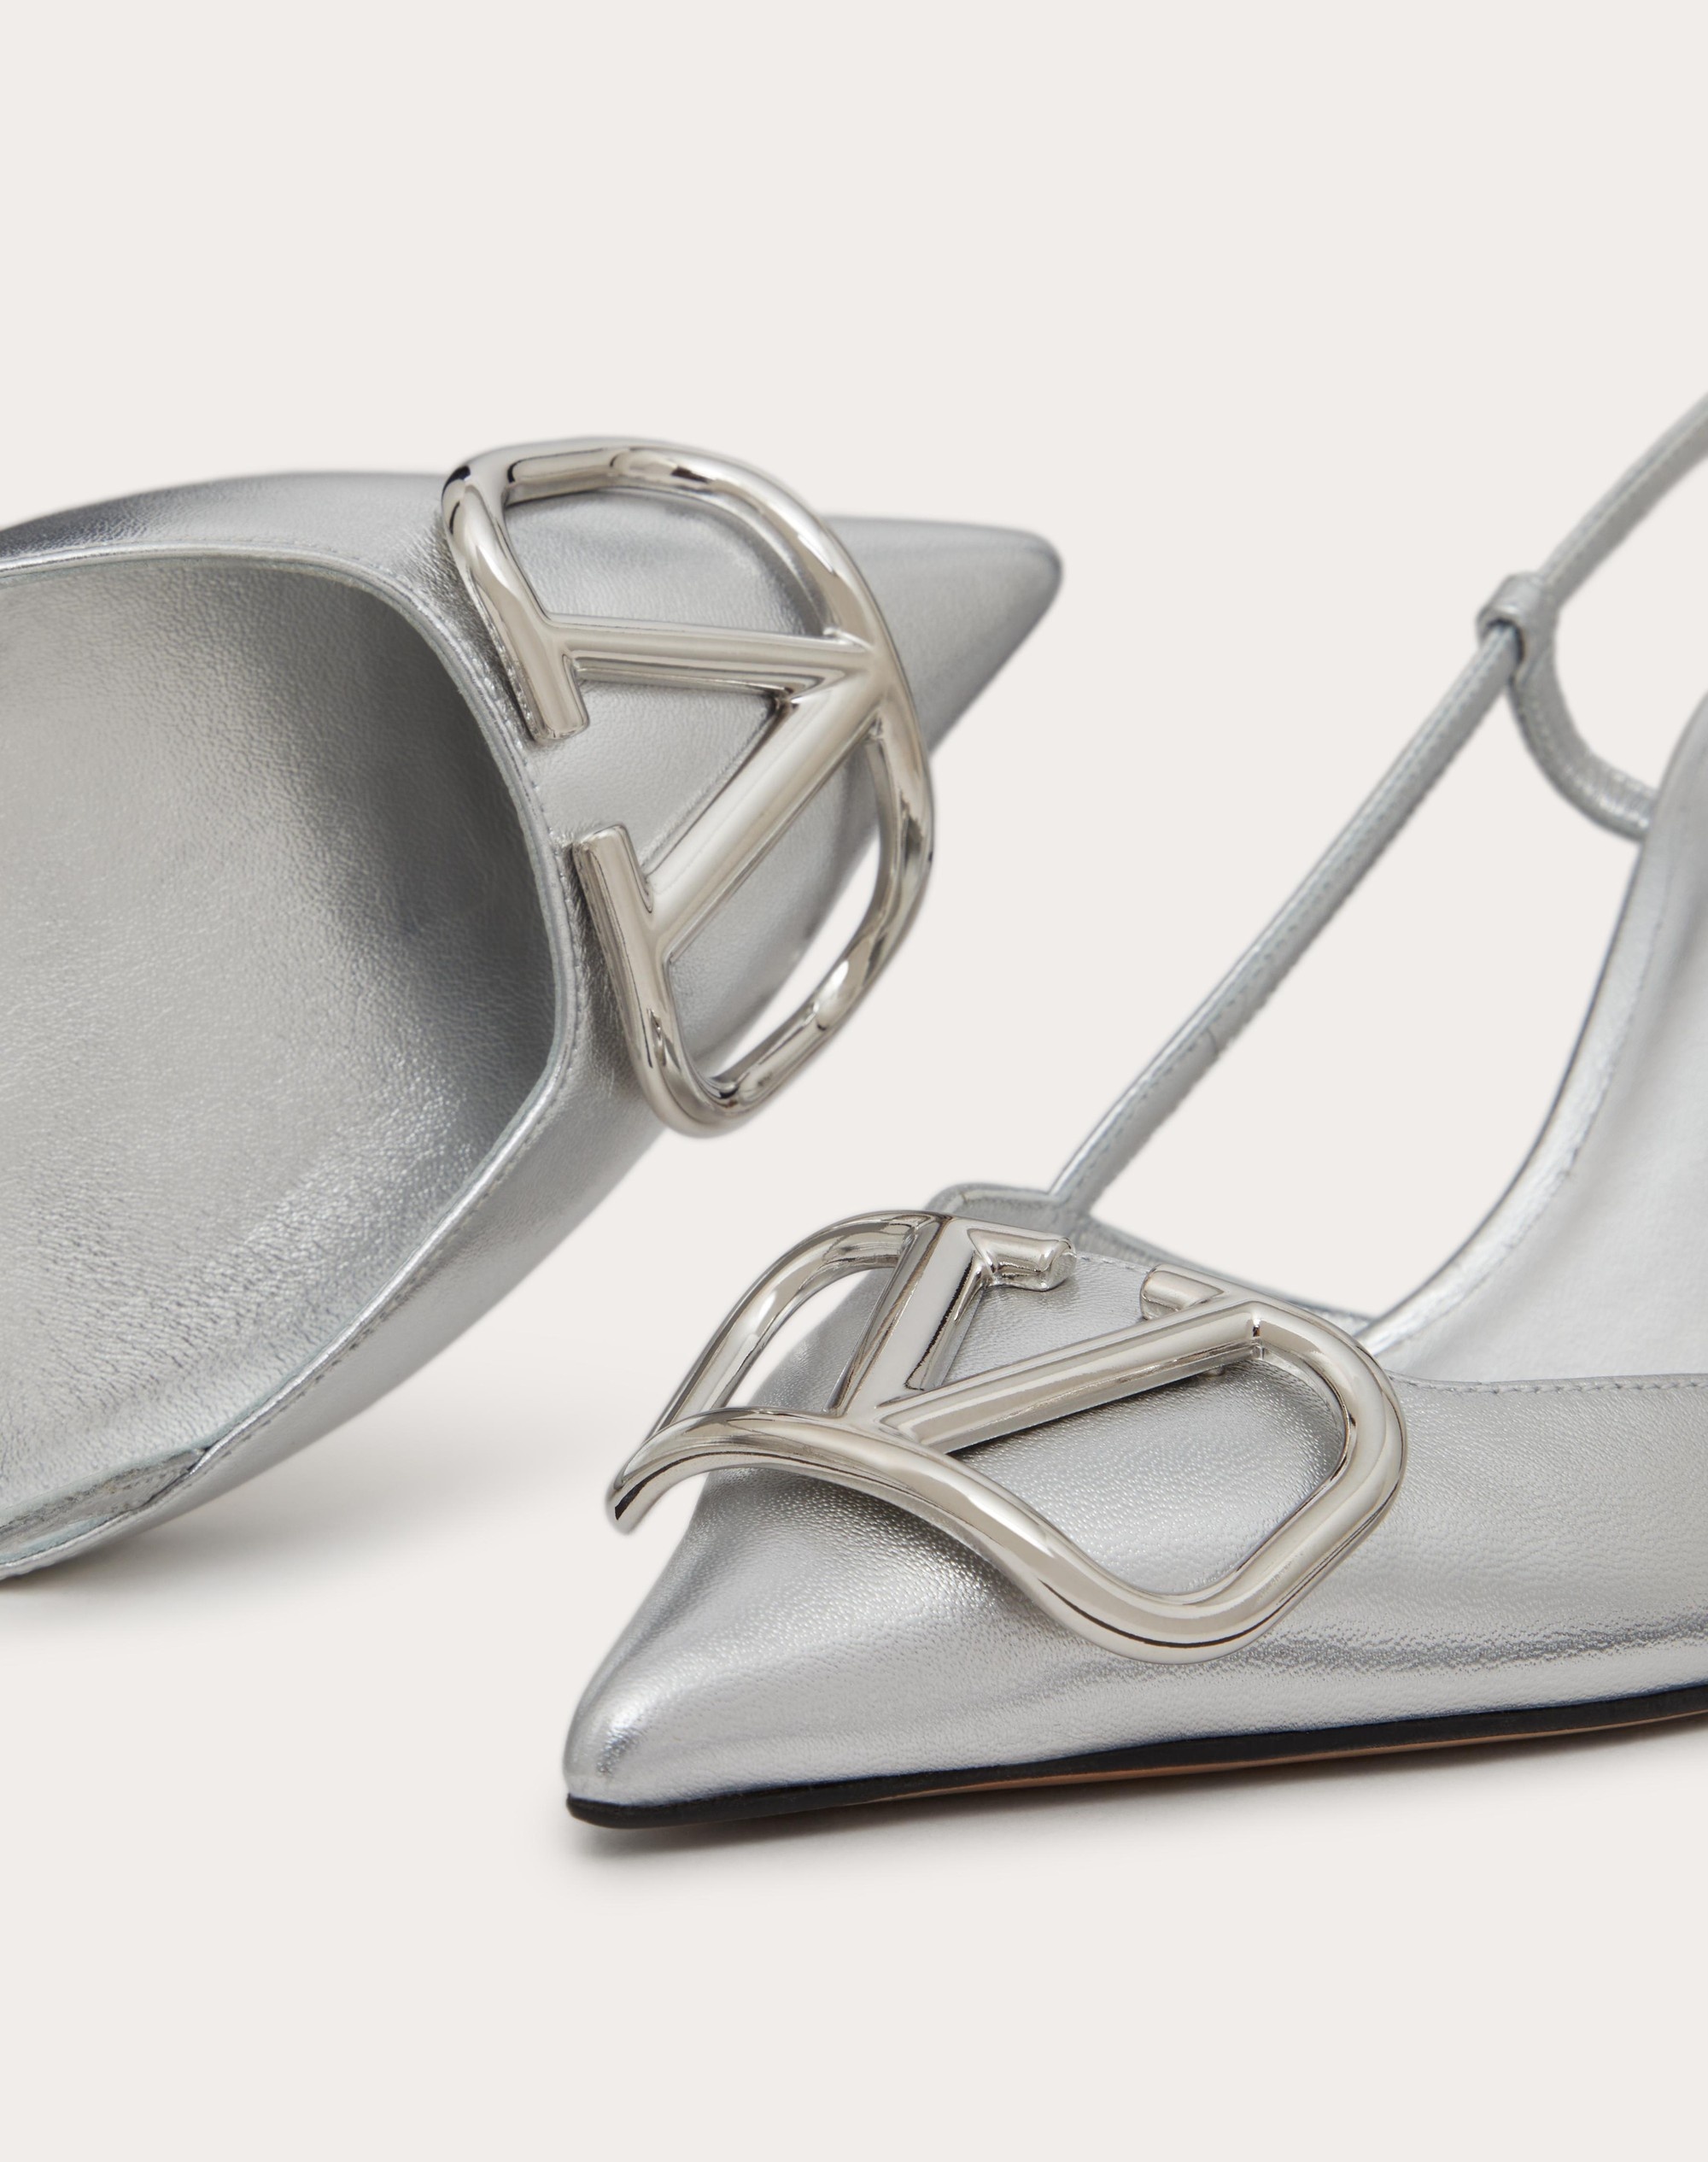 VLOGO SIGNATURE SLINGBACK PUMP IN LAMINATED NAPPA LEATHER 80MM - 5